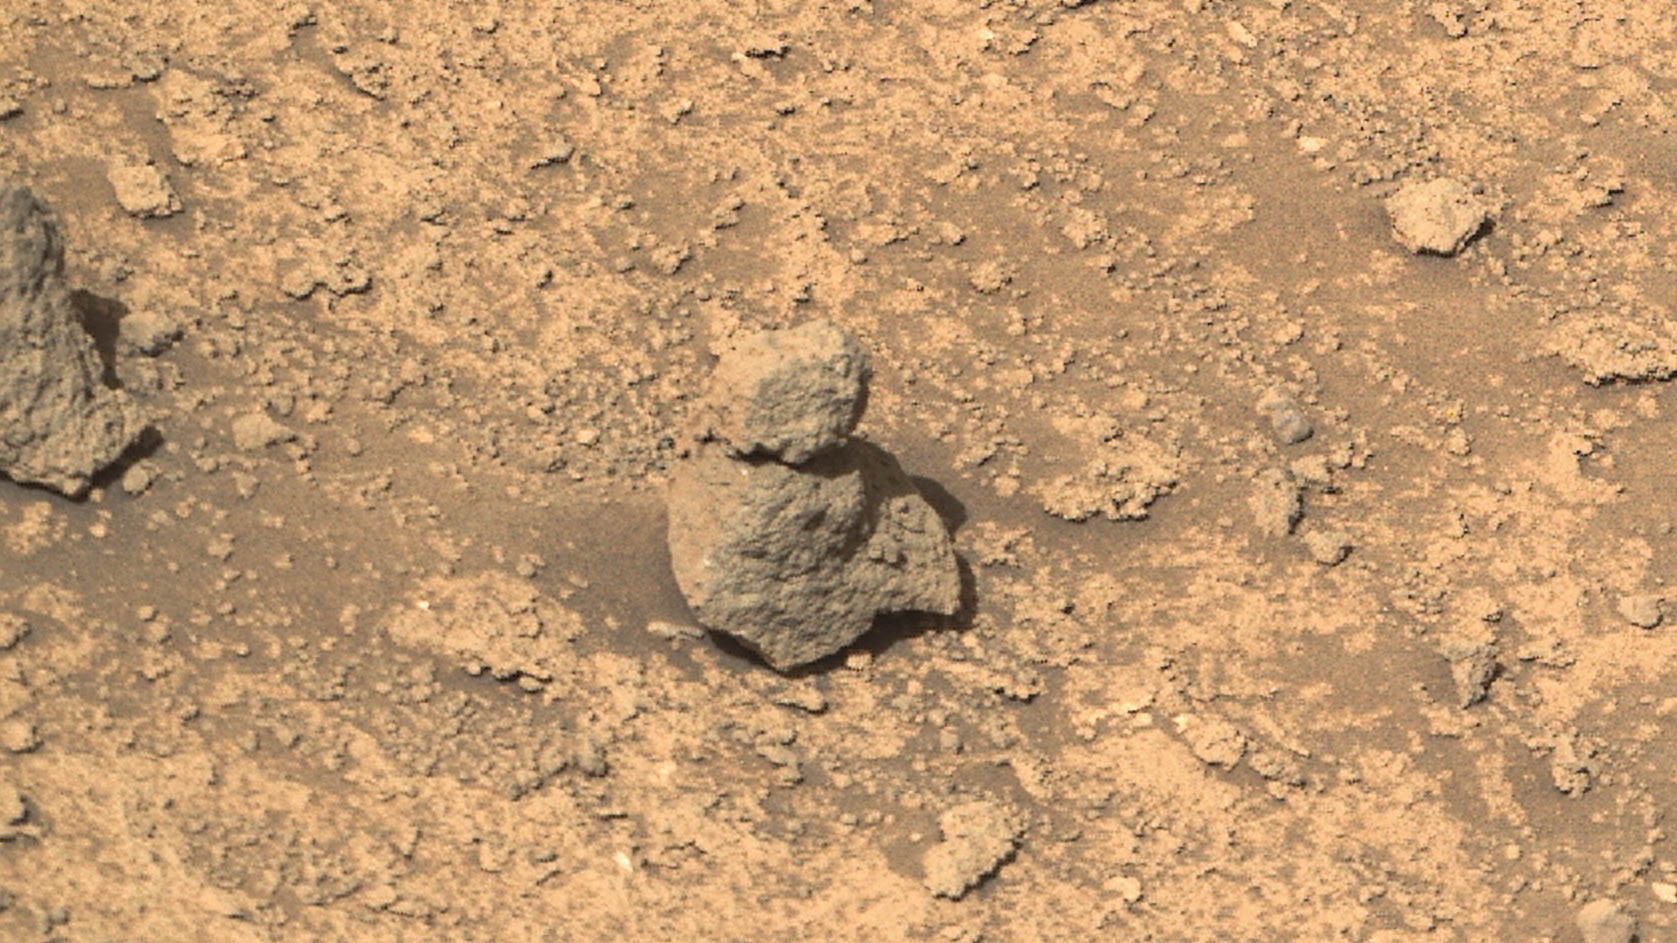  NASA's Perseverance Mars rover stumbles upon a dusty little snowman (photo) 